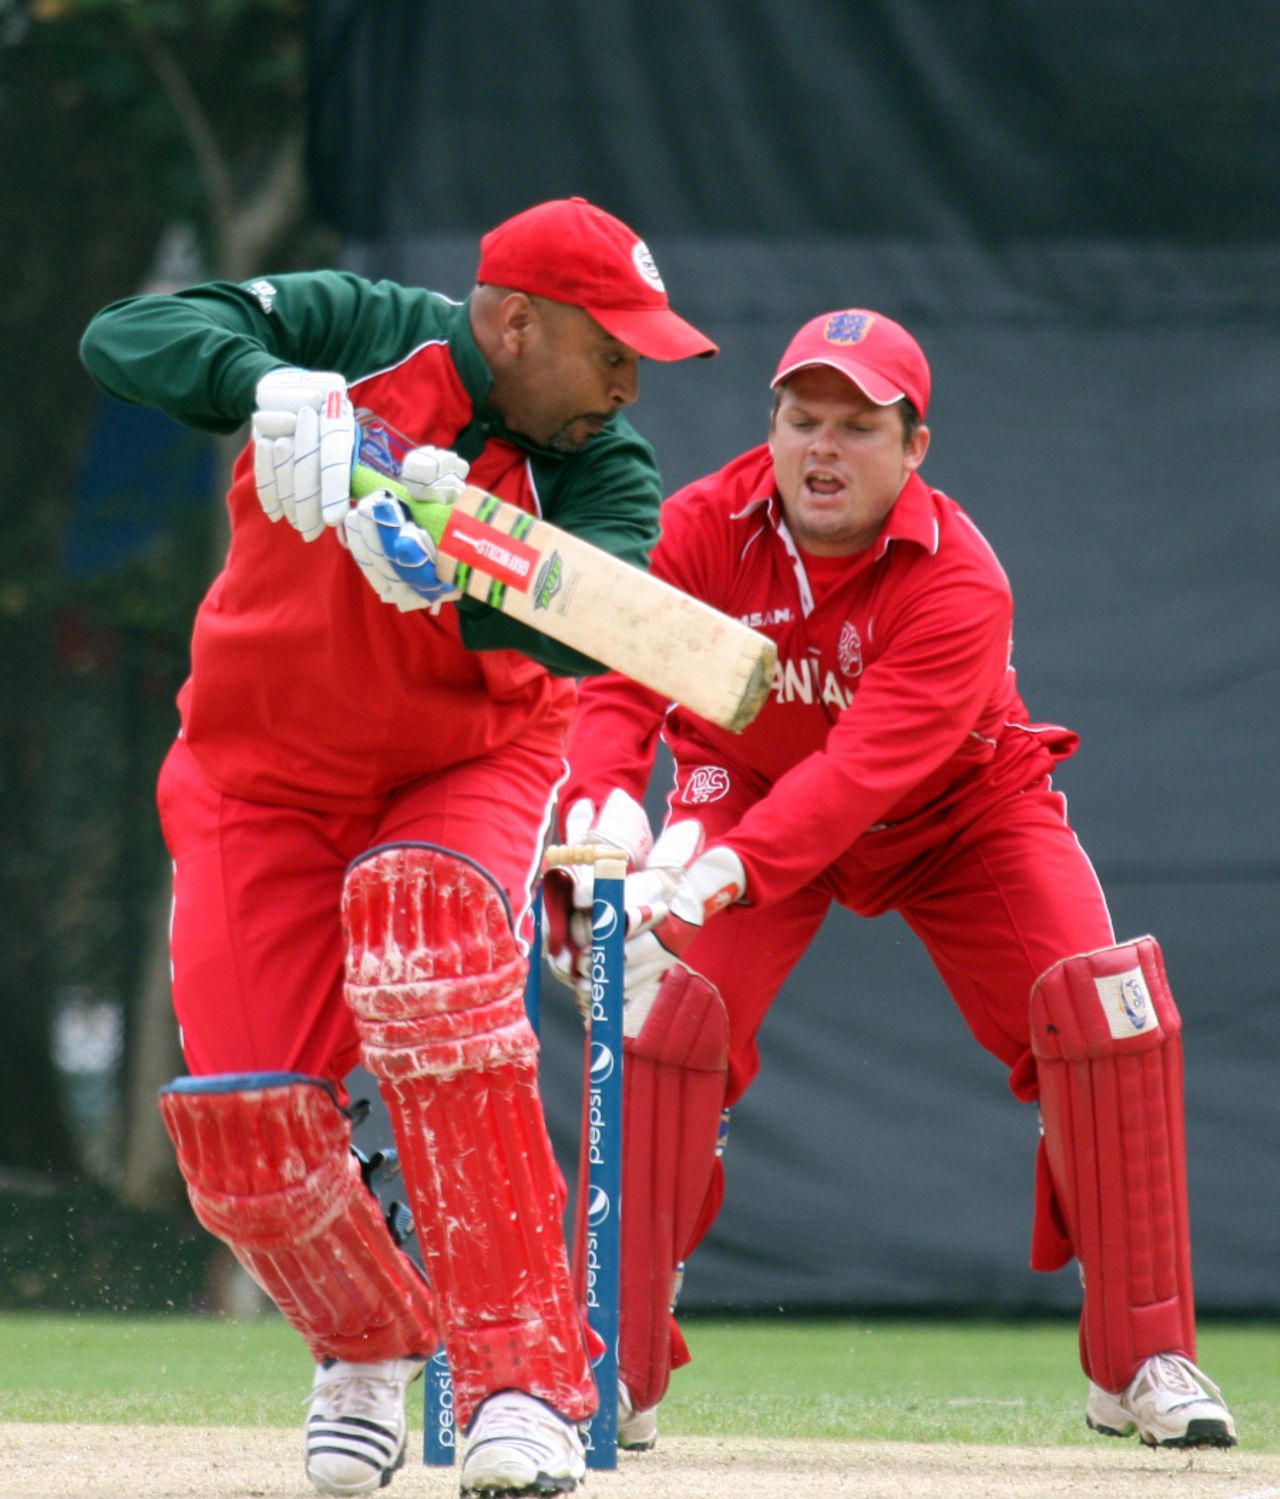 Al Said is well stumped by Freddie Klokker, Denmark v Oman, WCL Division Three, Kowloon, January 28, 2011